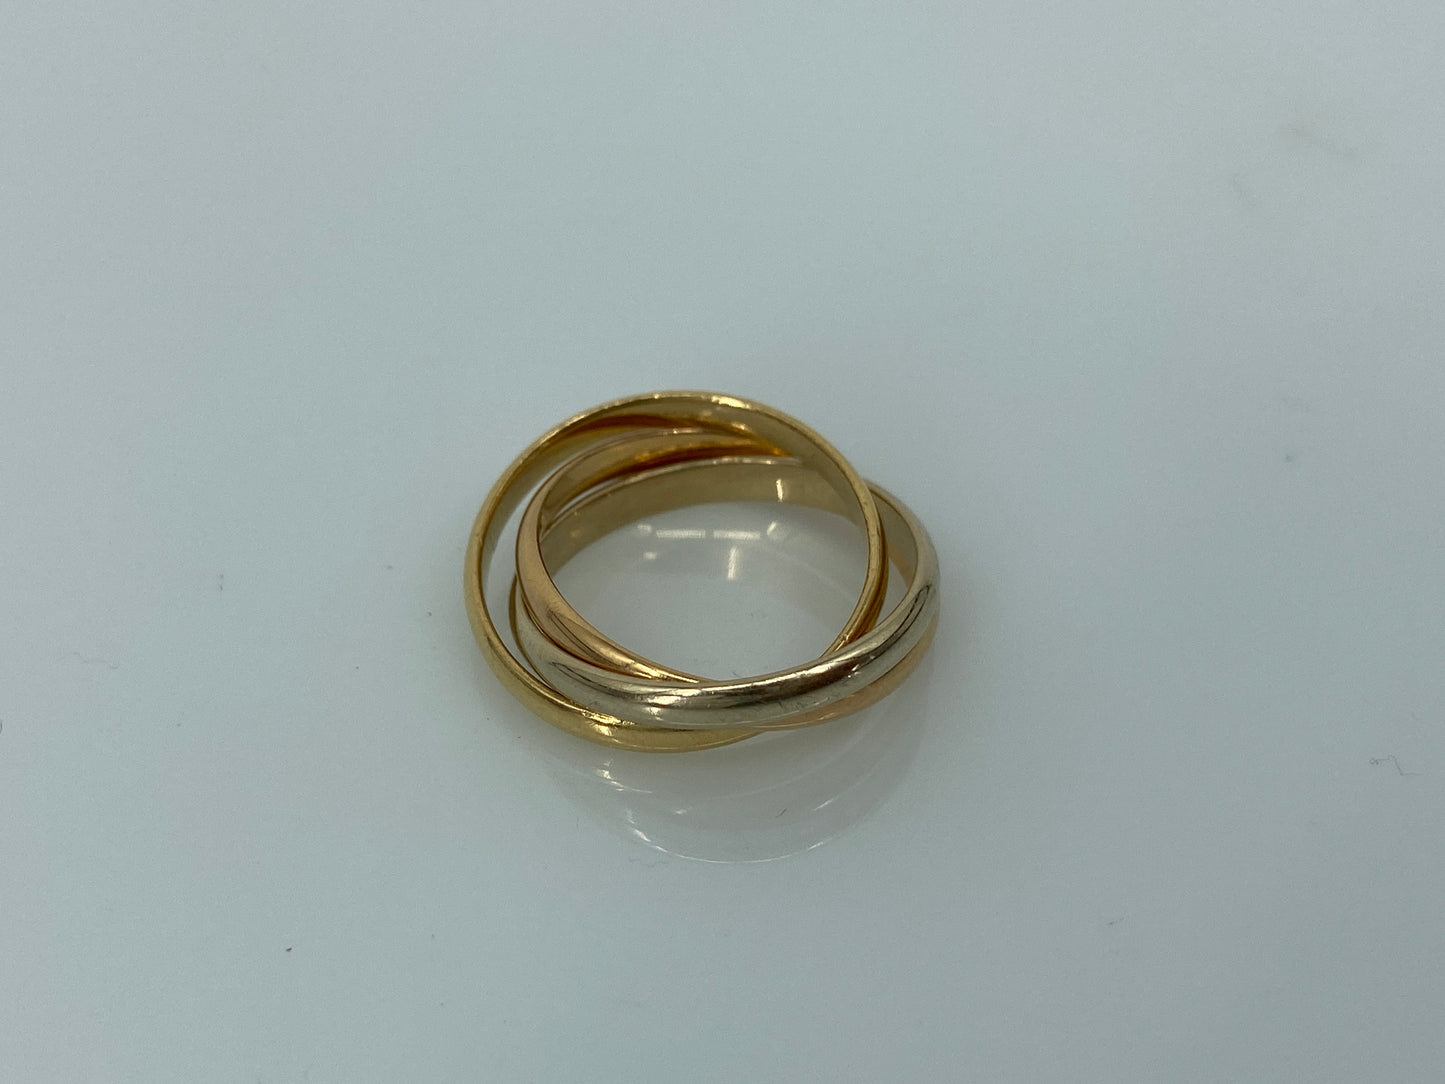 Cartier Trinity Ring Gold Size 52